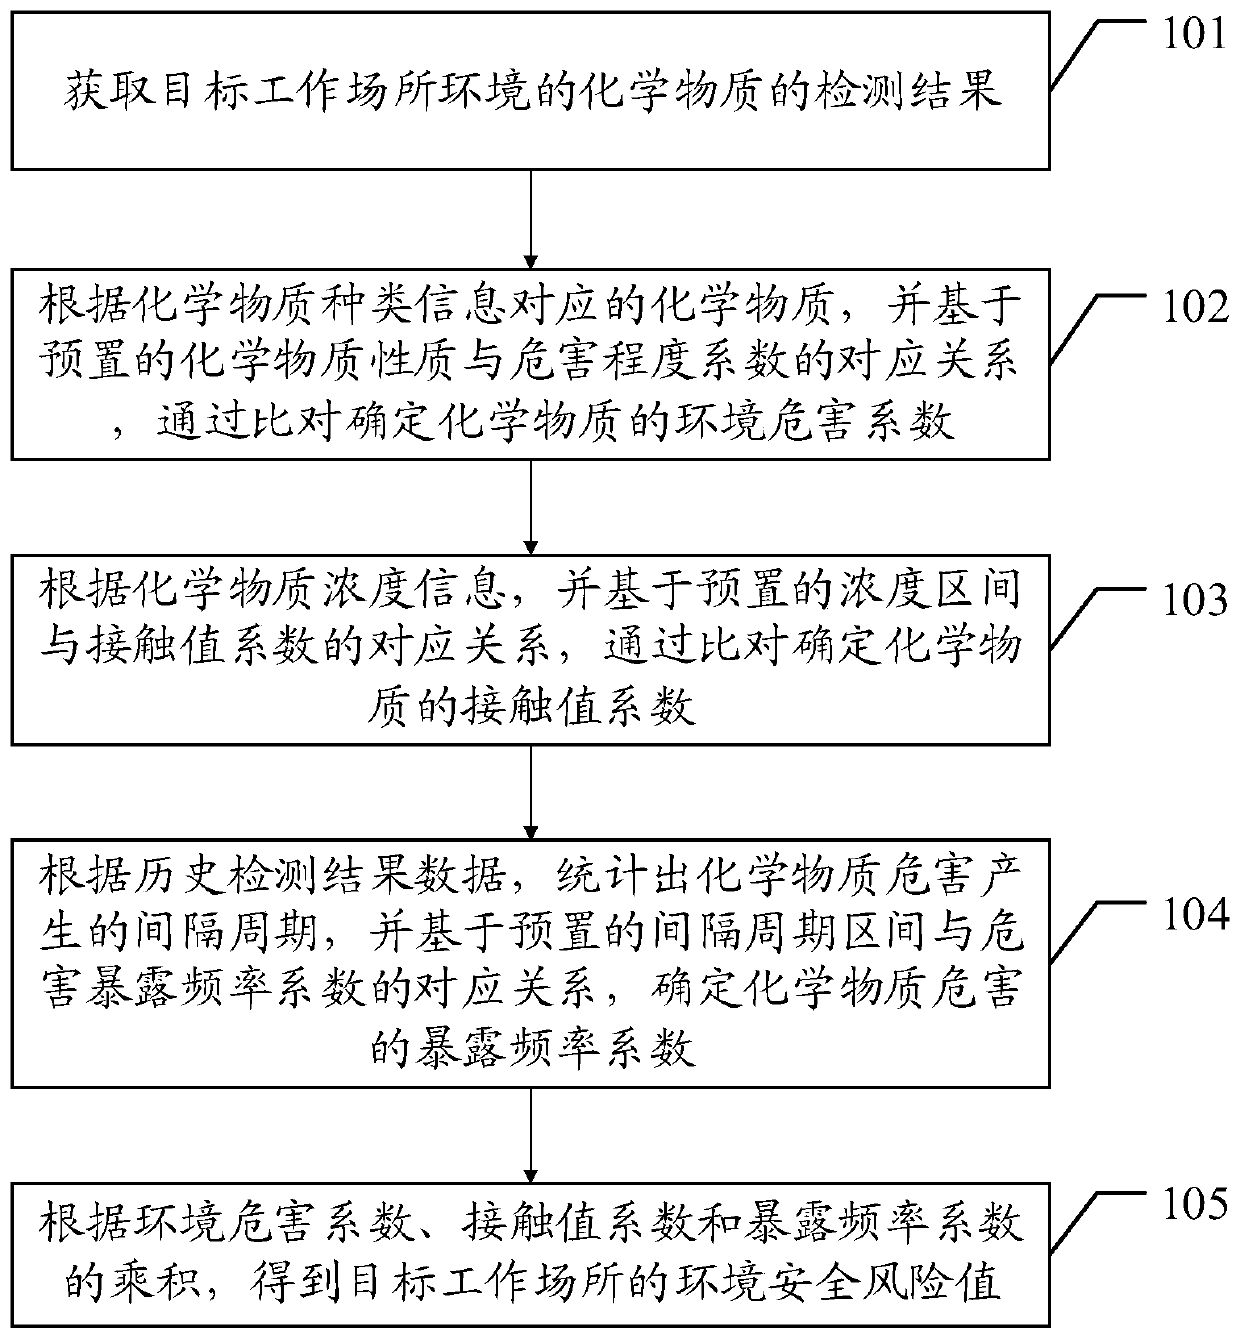 Fixed-point operation post working environment safety risk assessment method and related equipment